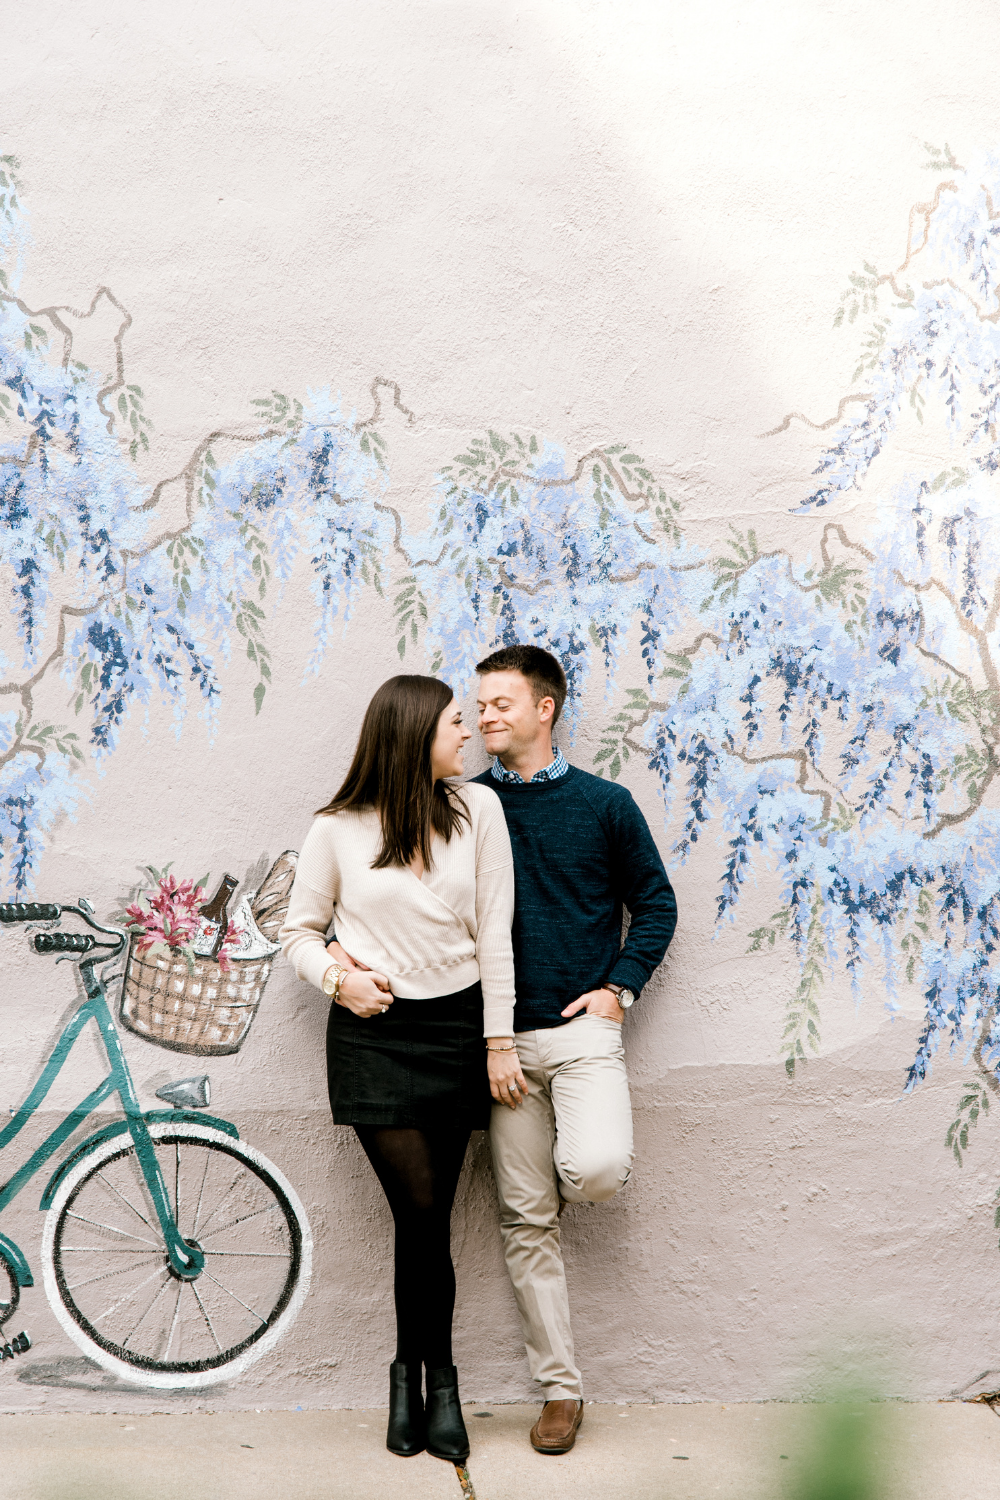 Winter engagement session photography in North Carolina in front of mural